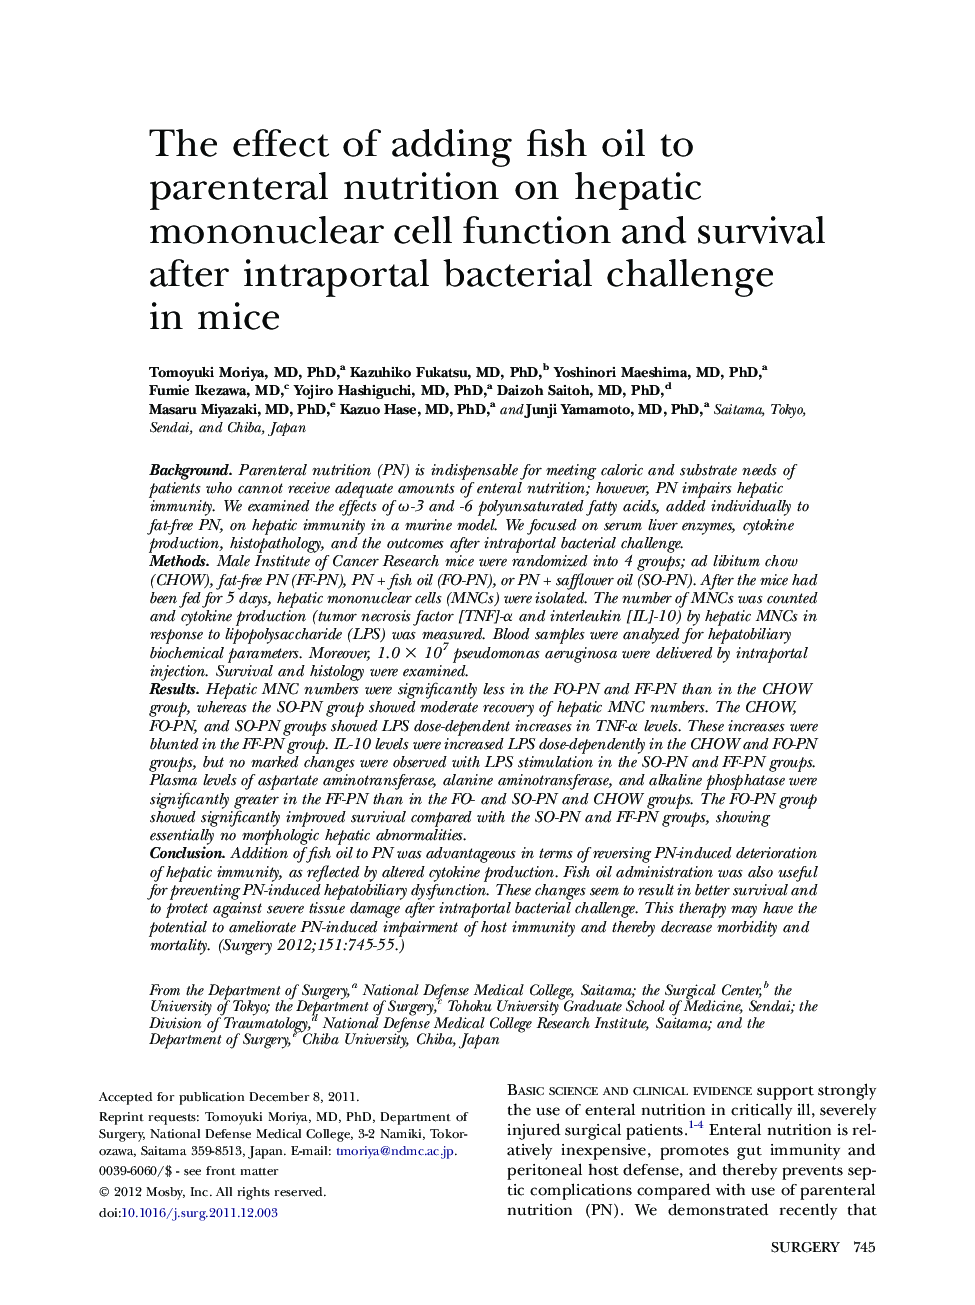 The effect of adding fish oil to parenteral nutrition on hepatic mononuclear cell function and survival after intraportal bacterial challenge in mice